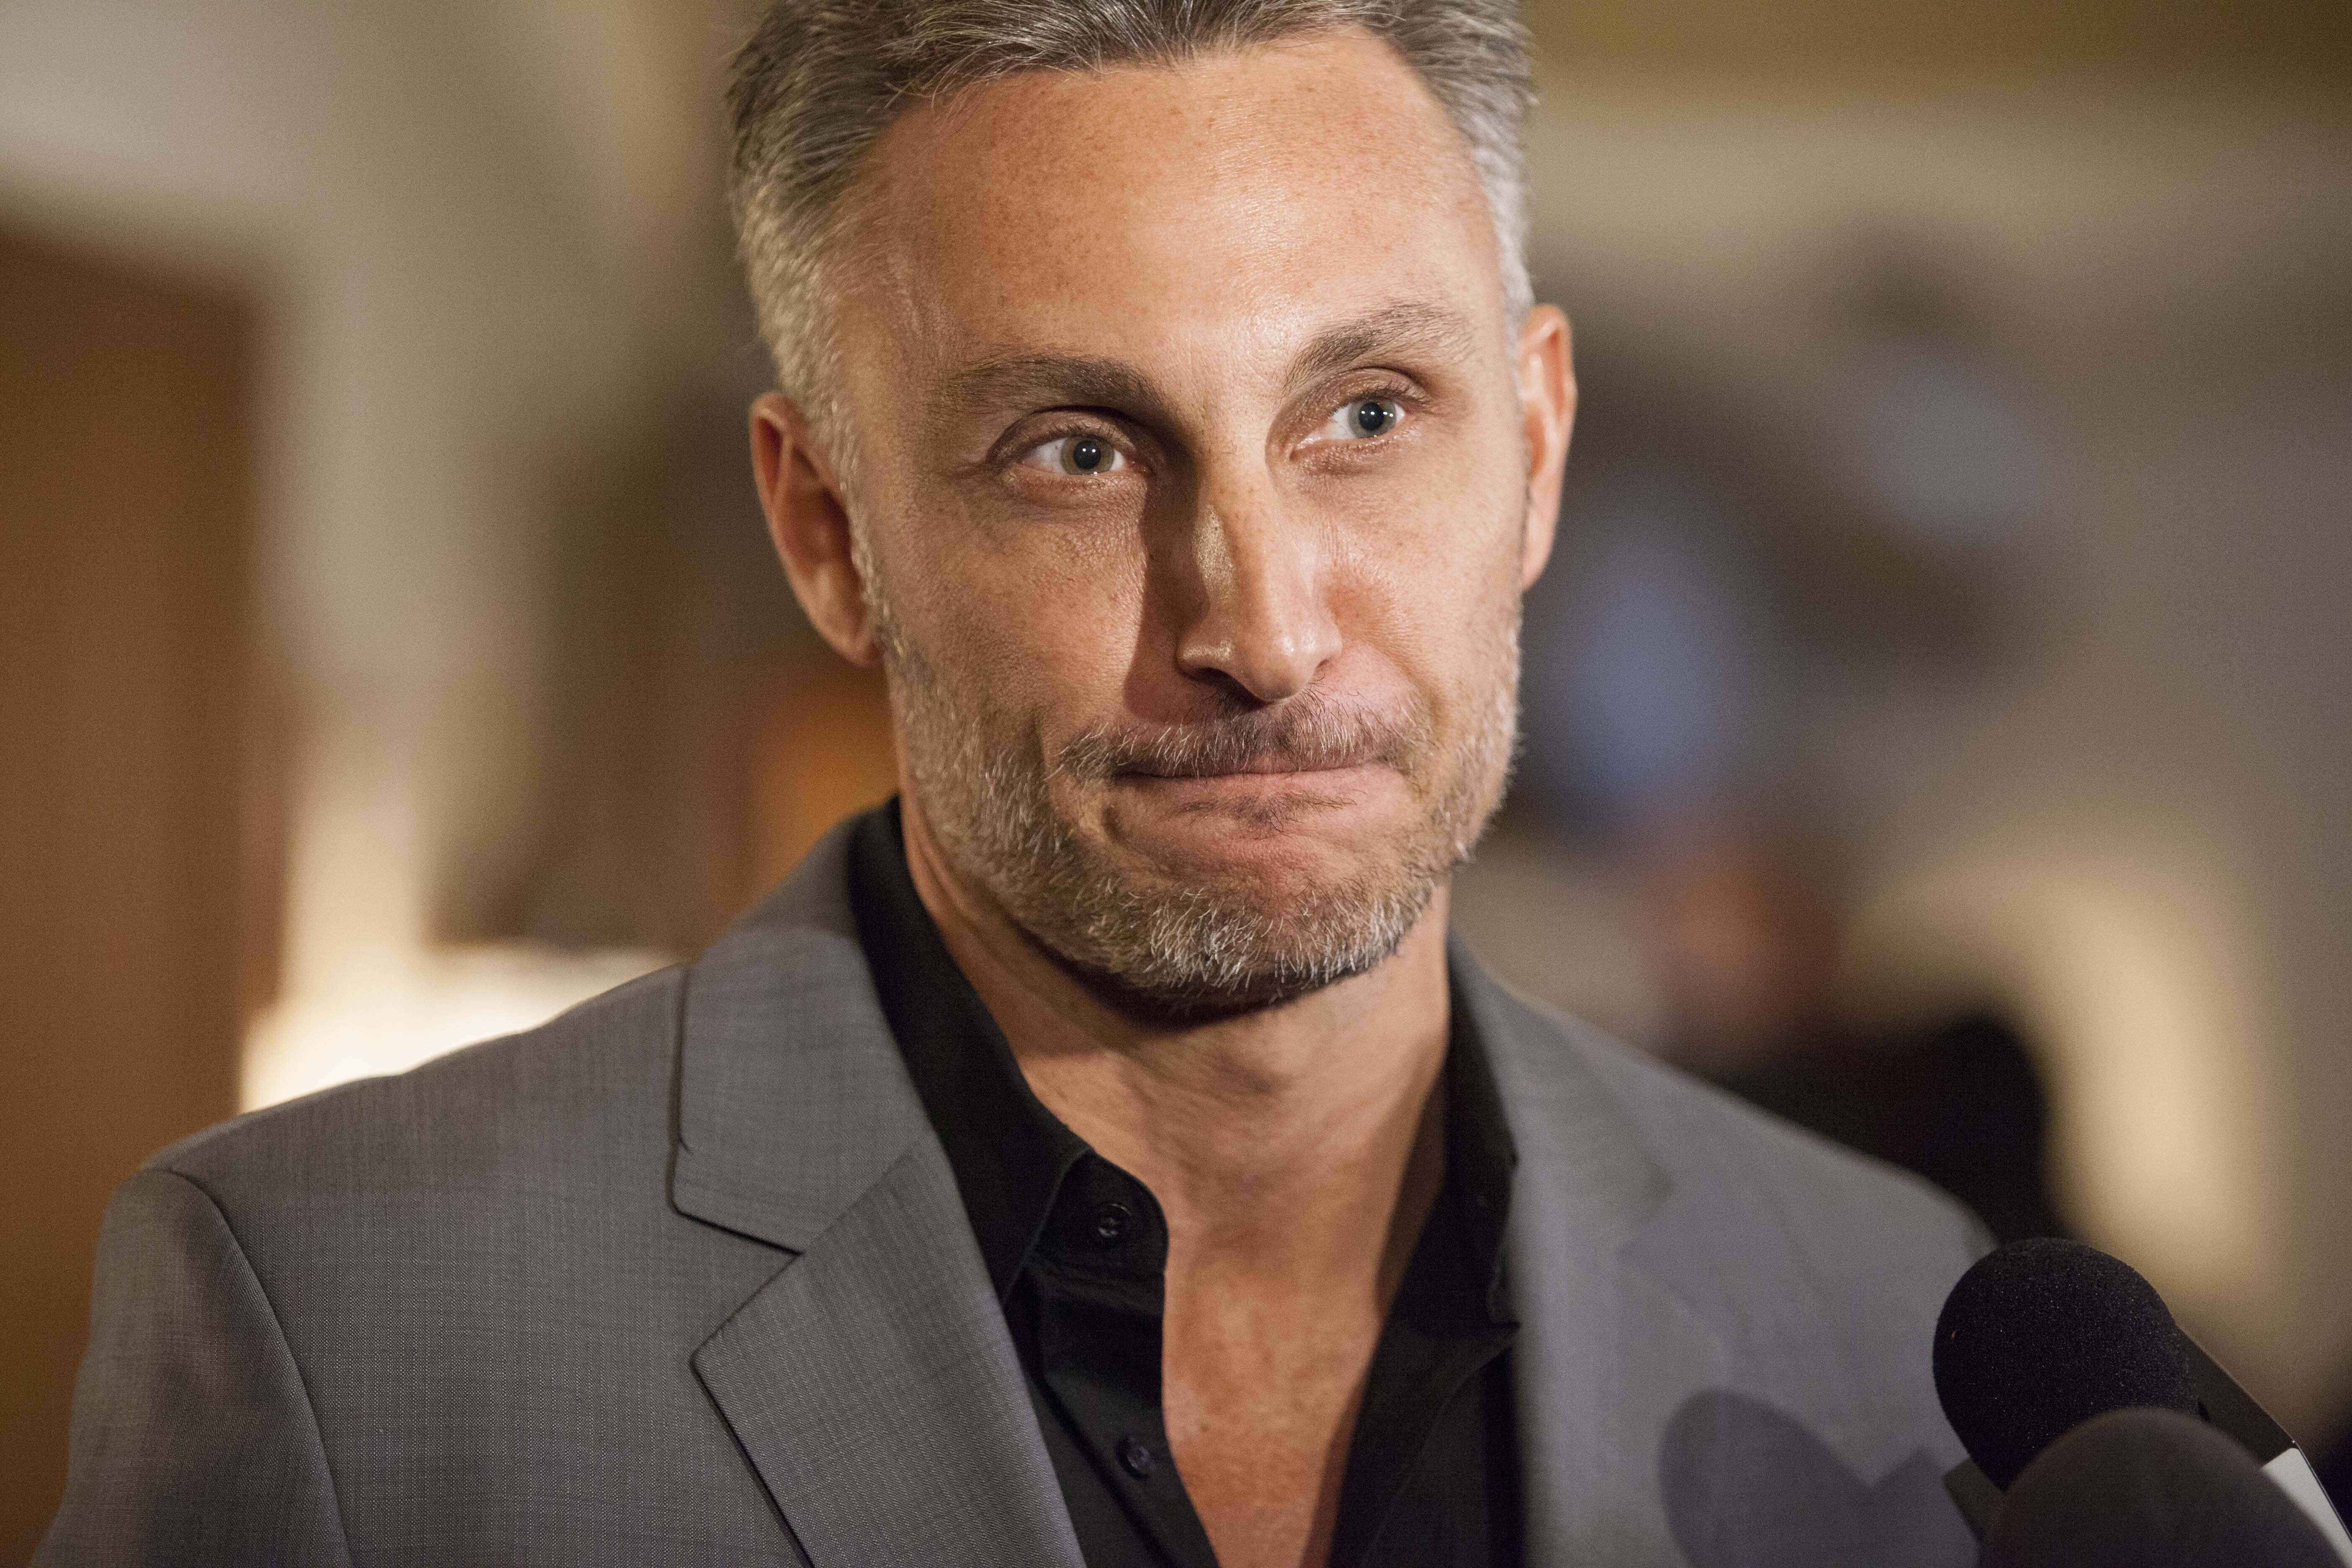 Tullian Tchividjian is a grandson of the late evangelist Billy Graham.